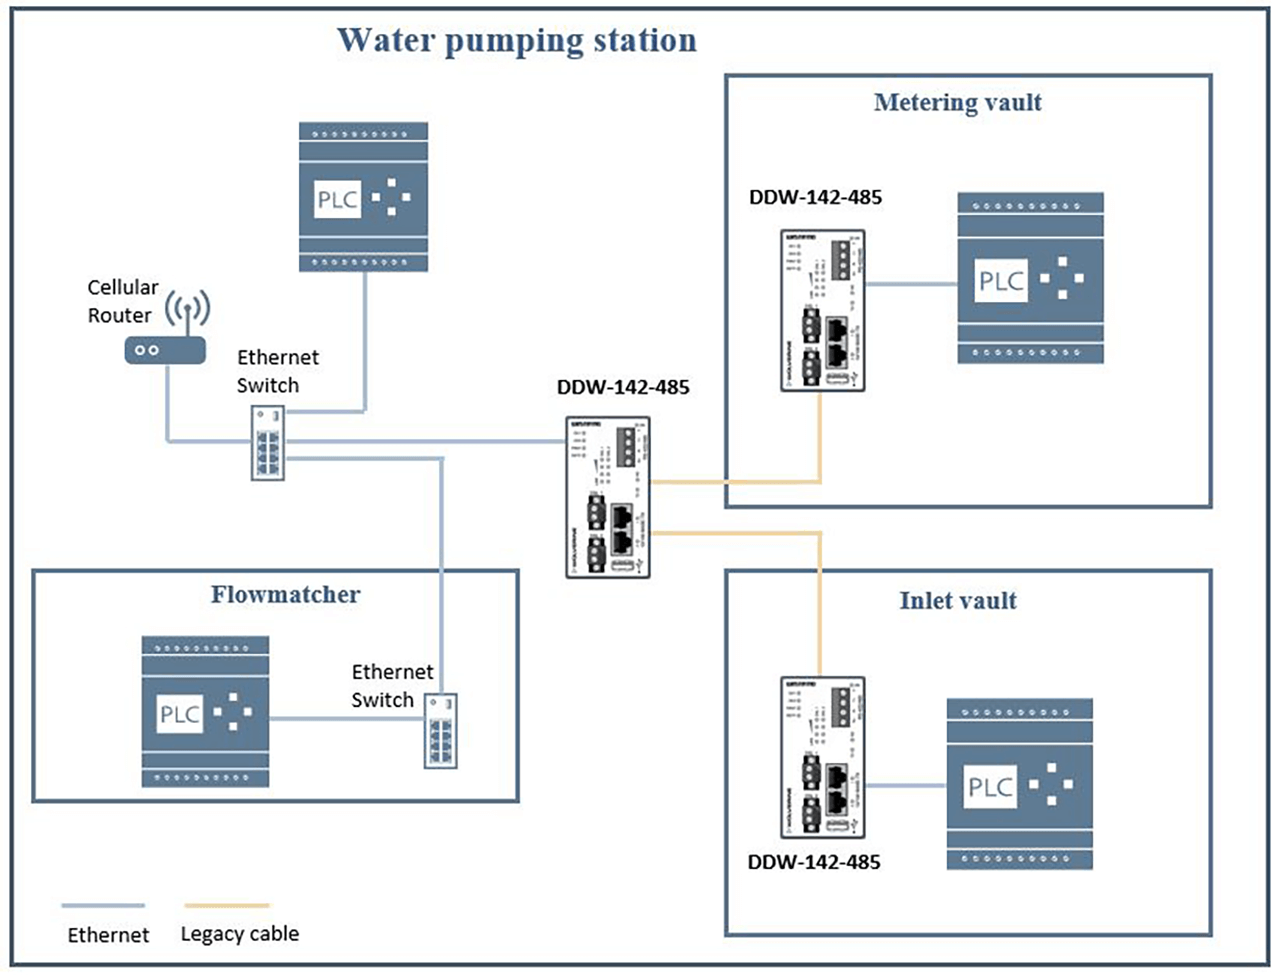 Network architecture at the water pumping station.